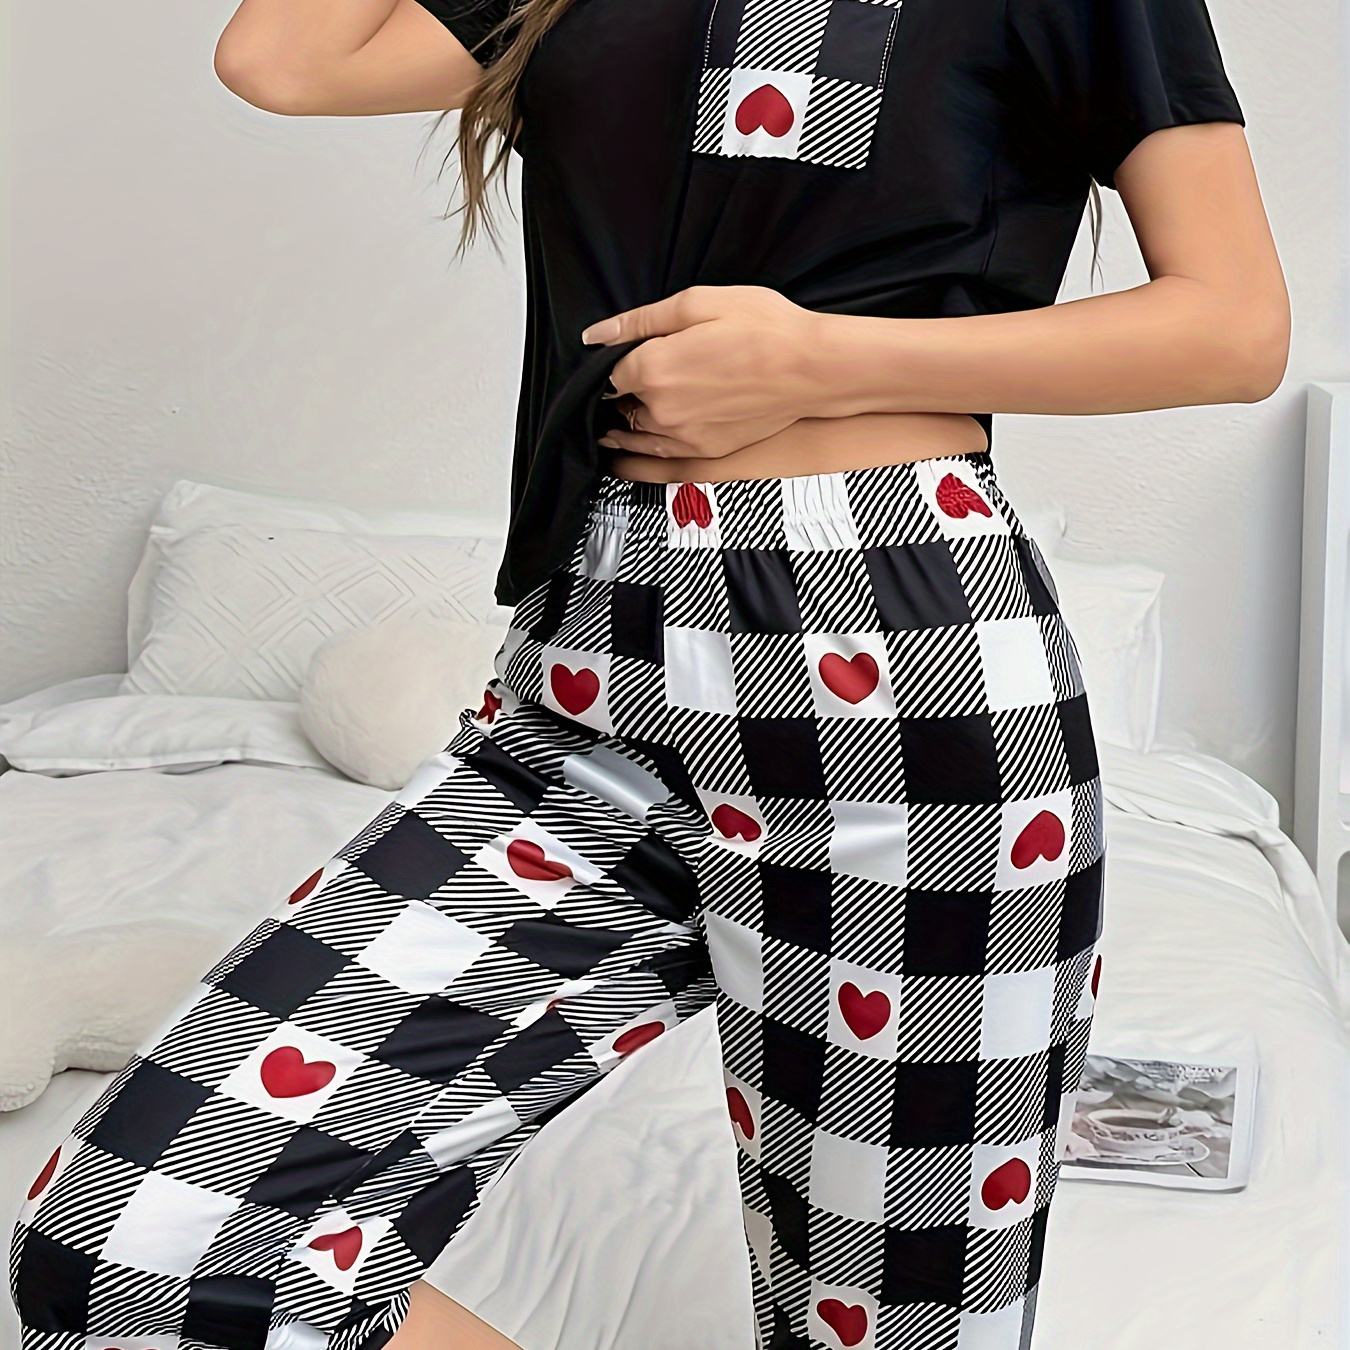 

Women's Heart & Plaid Print Casual Pajama Set, Short Sleeve Round Neck Top & Capri Pants, Comfortable Relaxed Fit